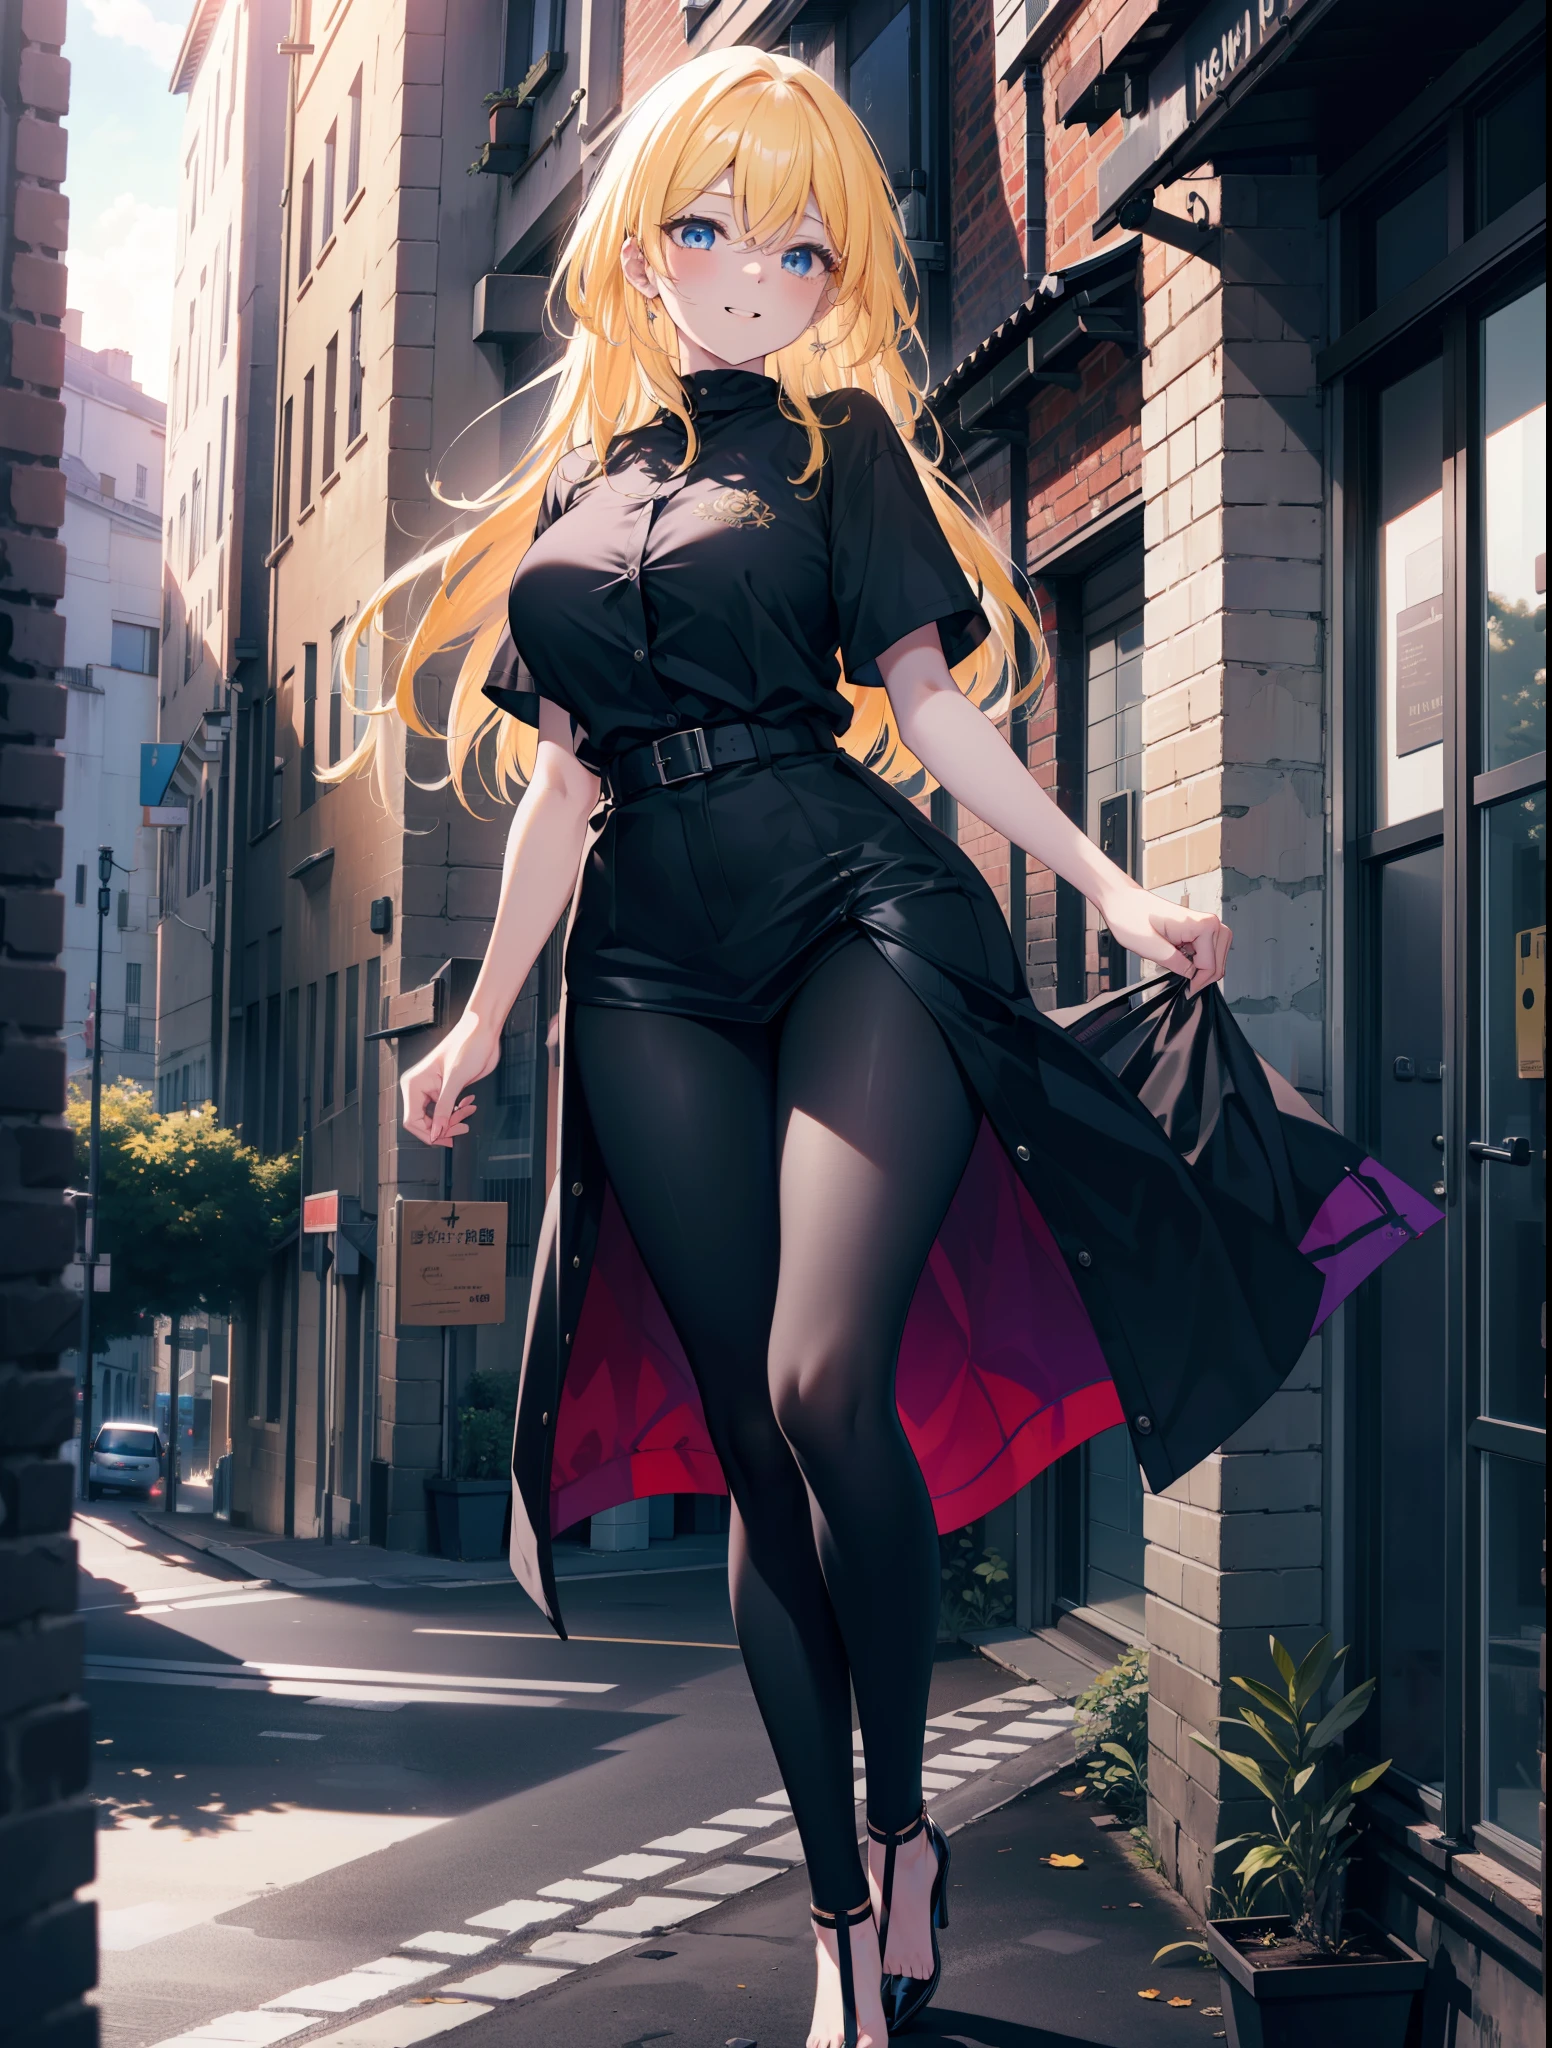 Eliase, catalyst, Yellow Hair, blue eyes,Long Hair,happy smile, smile, Open your mouth, Oversized black y-shirt,Big Breasts,black skinny pants,Stiletto heels,morning,morning陽,The sun is rising,walking,whole bodyがイラストに入るように,Looking up from below,
break looking at viewer,whole body,
break outdoors, In town,
break (masterpiece:1.2), highest quality, High resolution, unity 8k wallpaper, (figure:0.8), (Beautiful fine details:1.6), Highly detailed face, Perfect lighting, Highly detailed CG, (Perfect hands, Perfect Anatomy),